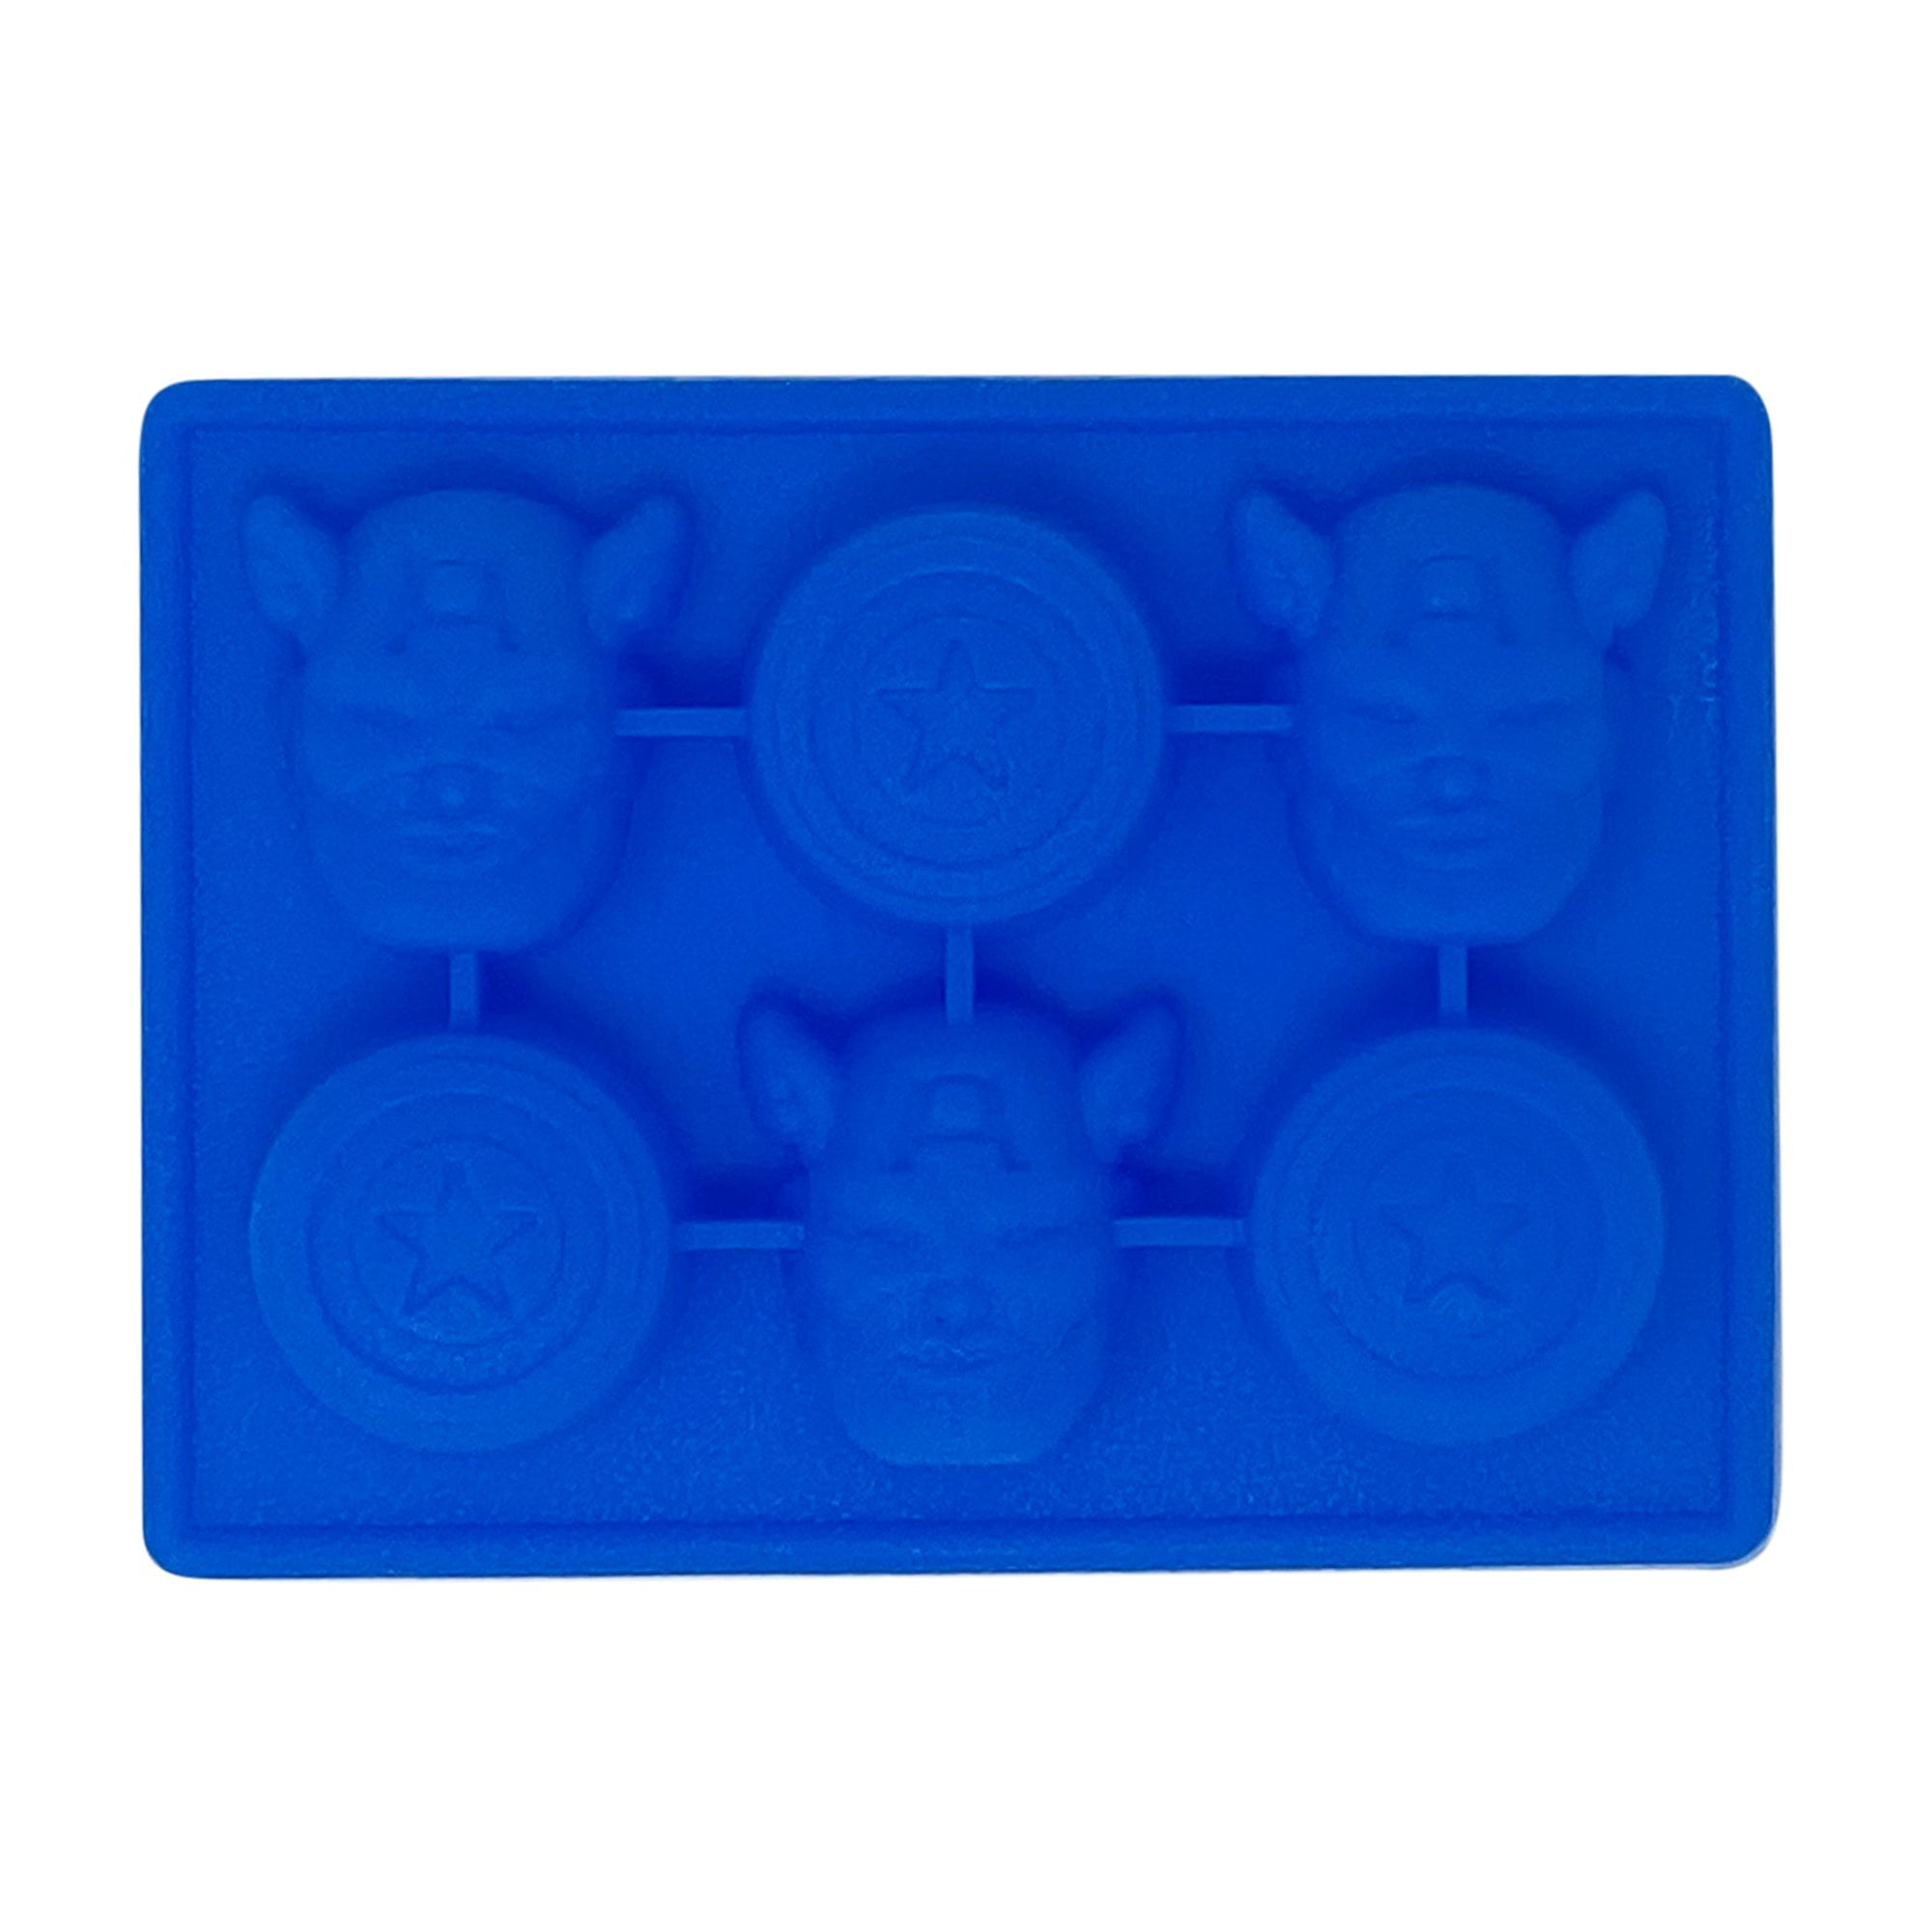 ICUP Star Wars Death Star Ice Cube Mold Tray, Freezer Bar Items Shapes &  Trays